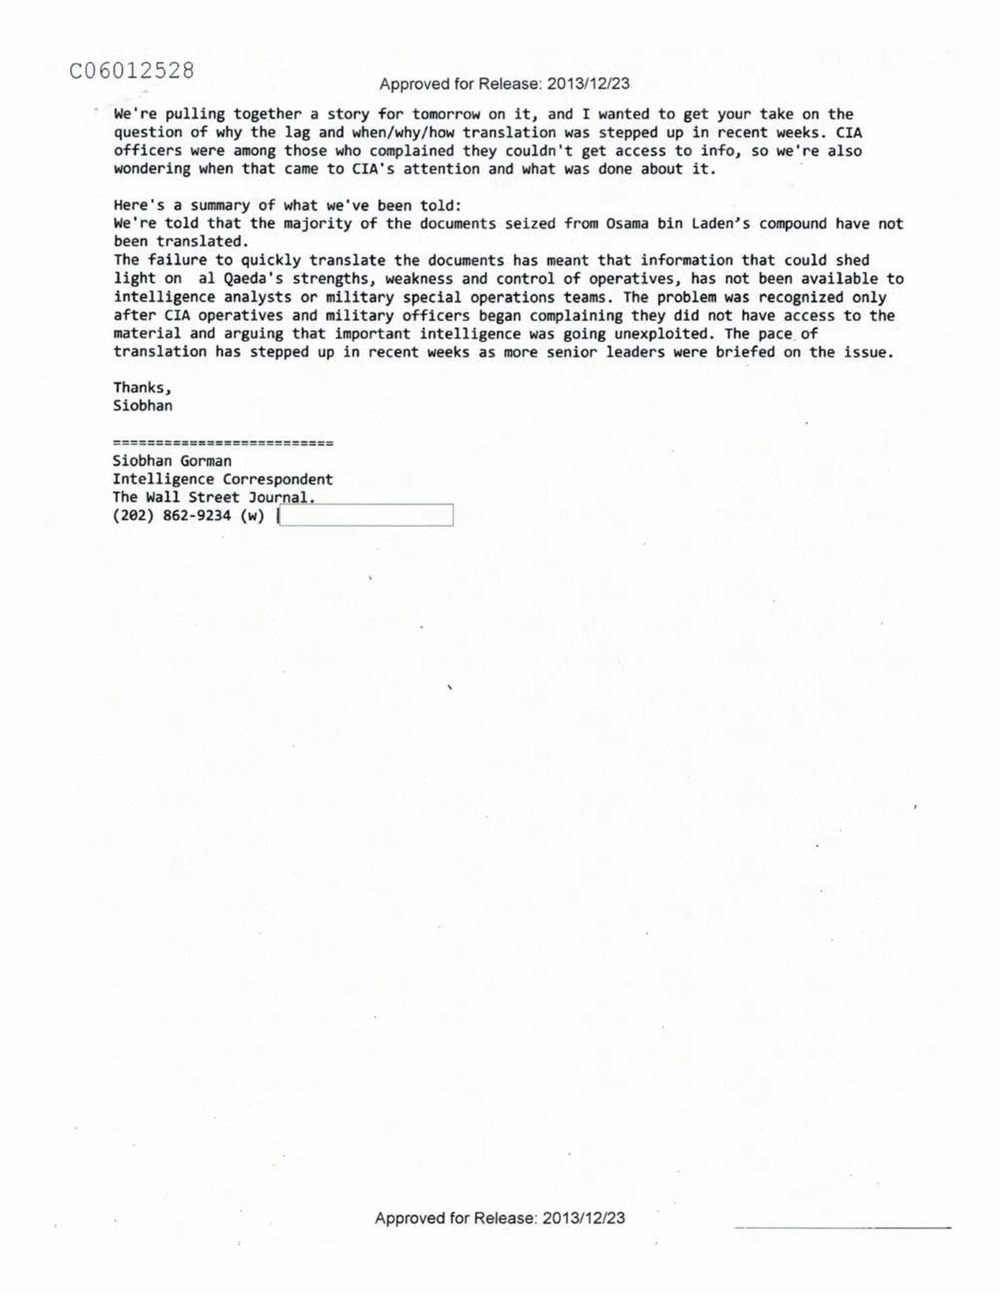 Page 56 from Email Correspondence Between Reporters and CIA Flacks